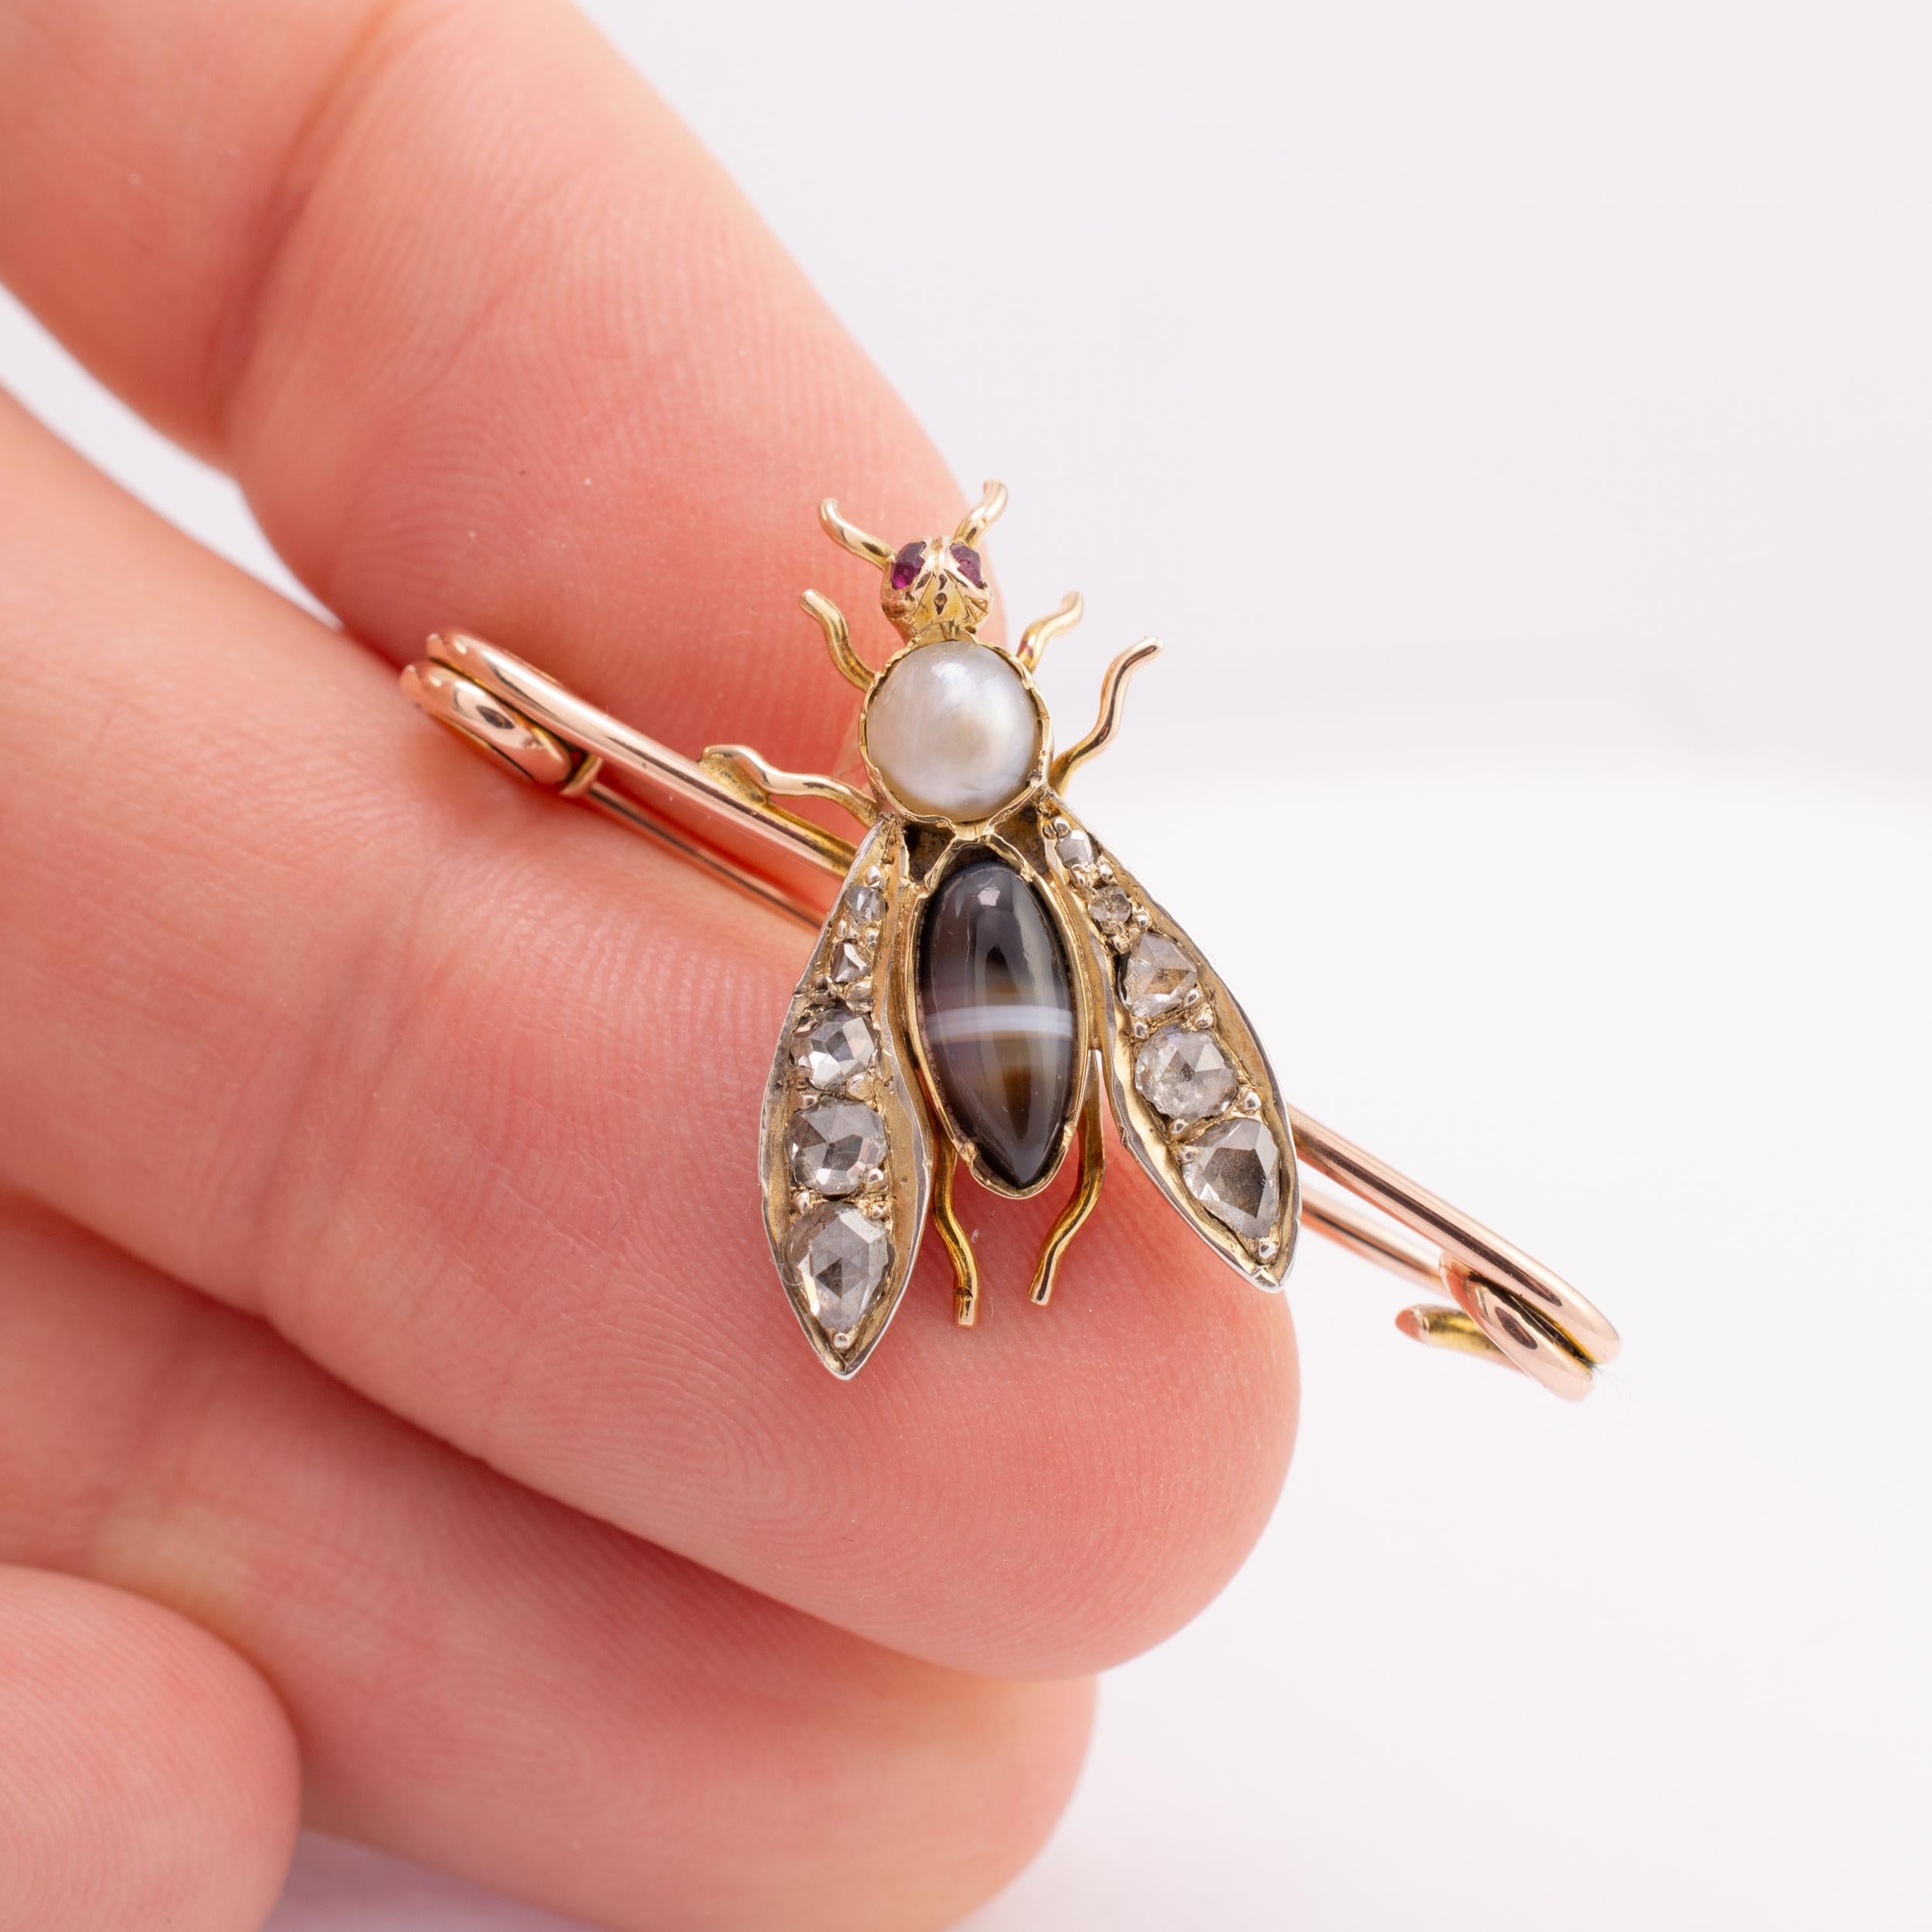 Antique Bee Insect Brooch Diamonds Rubies Pearl Hallmarked Chester 1909 6